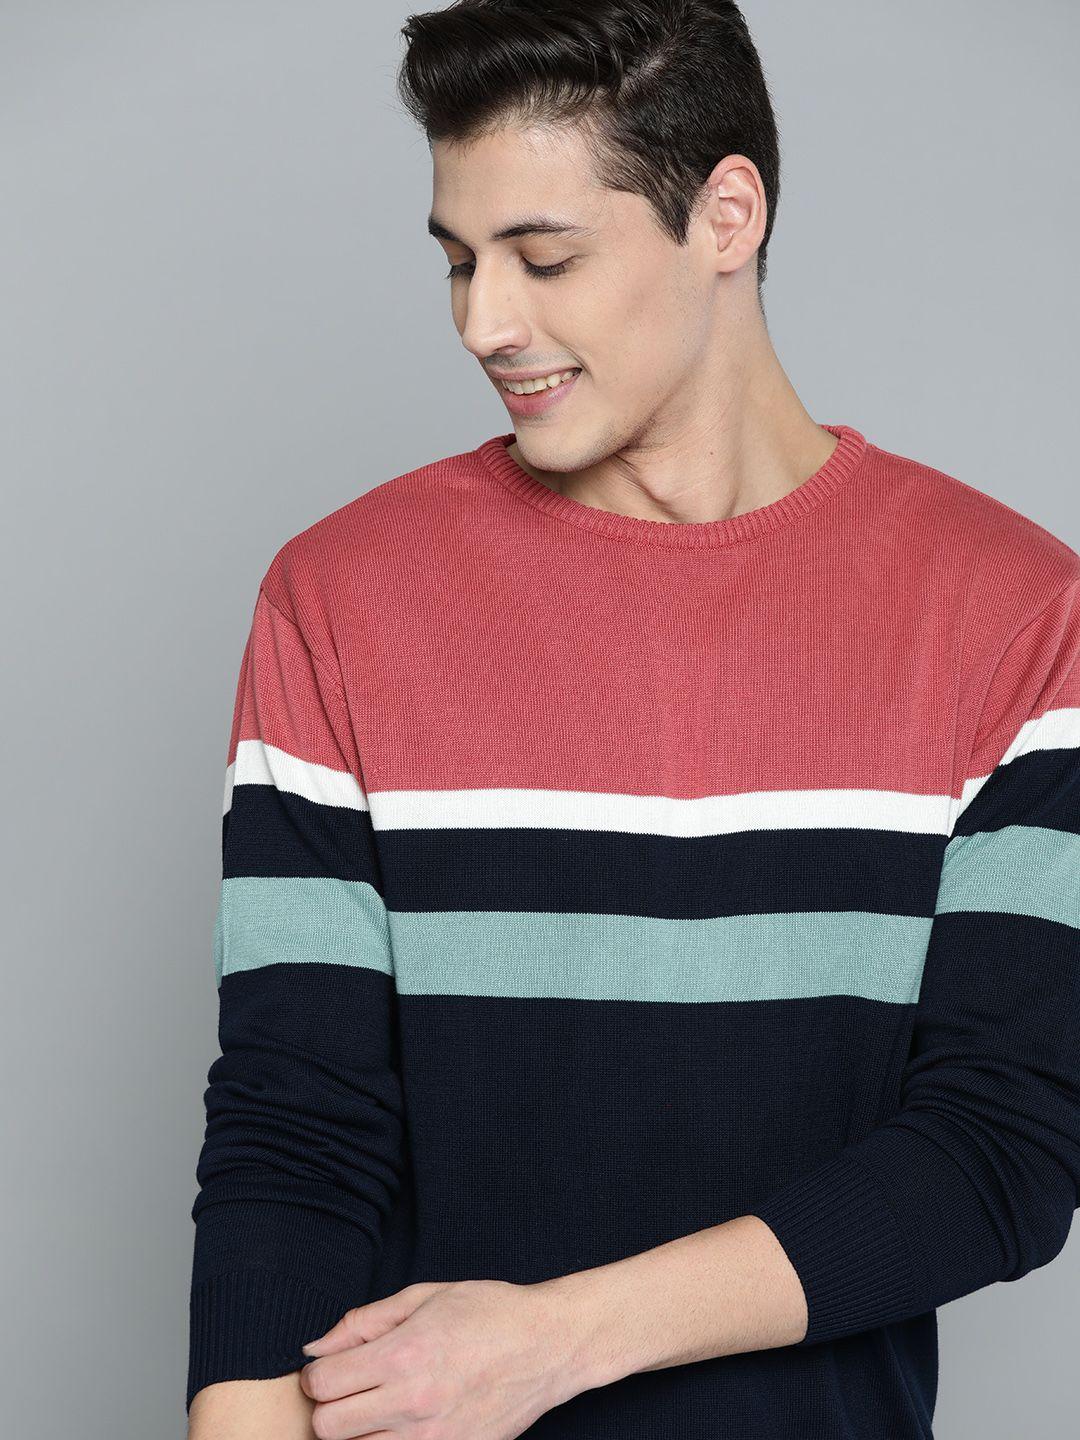 mast & harbour men dusty pink & navy striped sweater